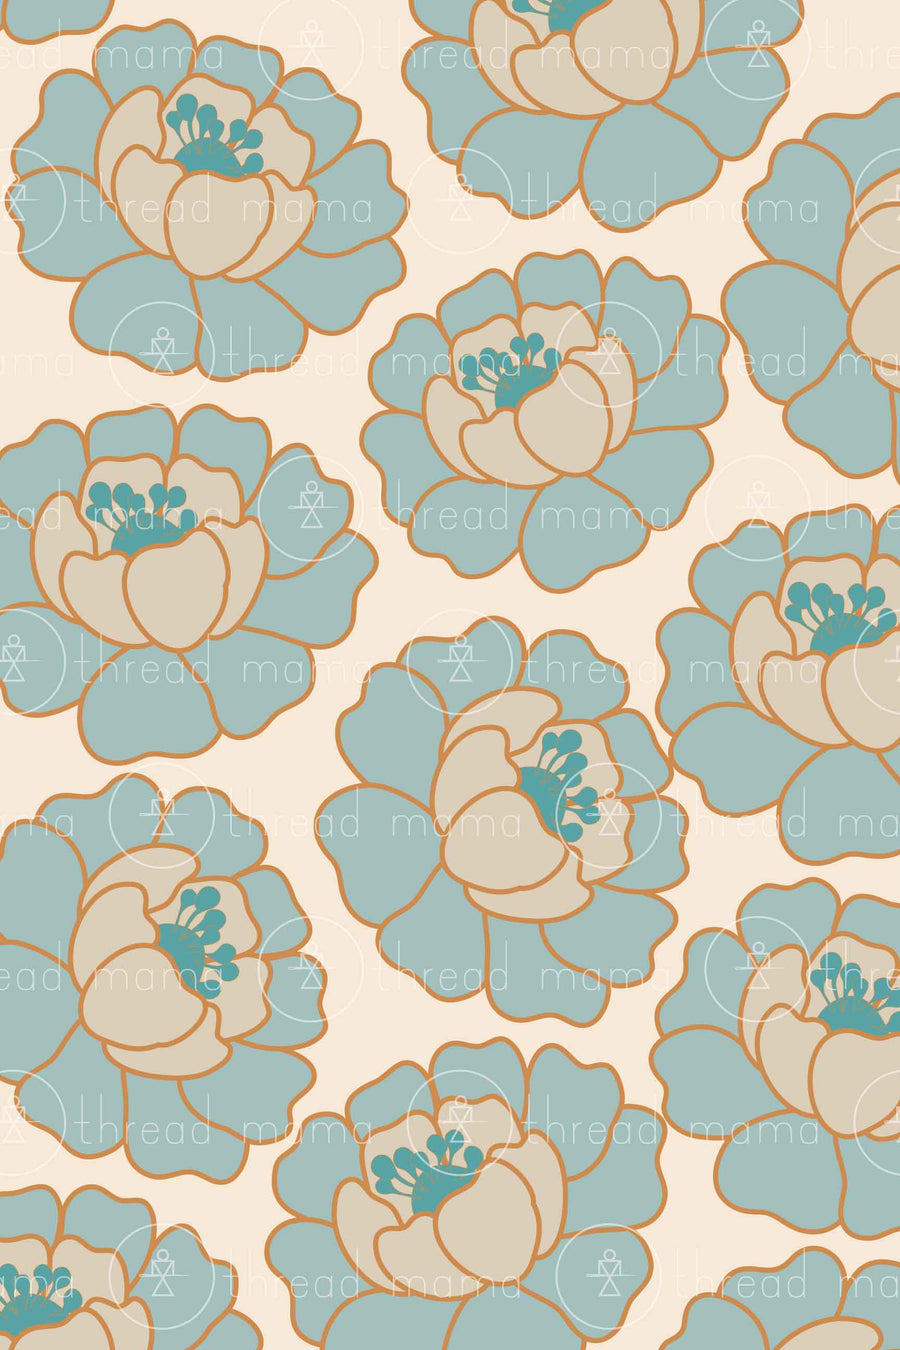 Repeating Pattern #6 (Seamless)